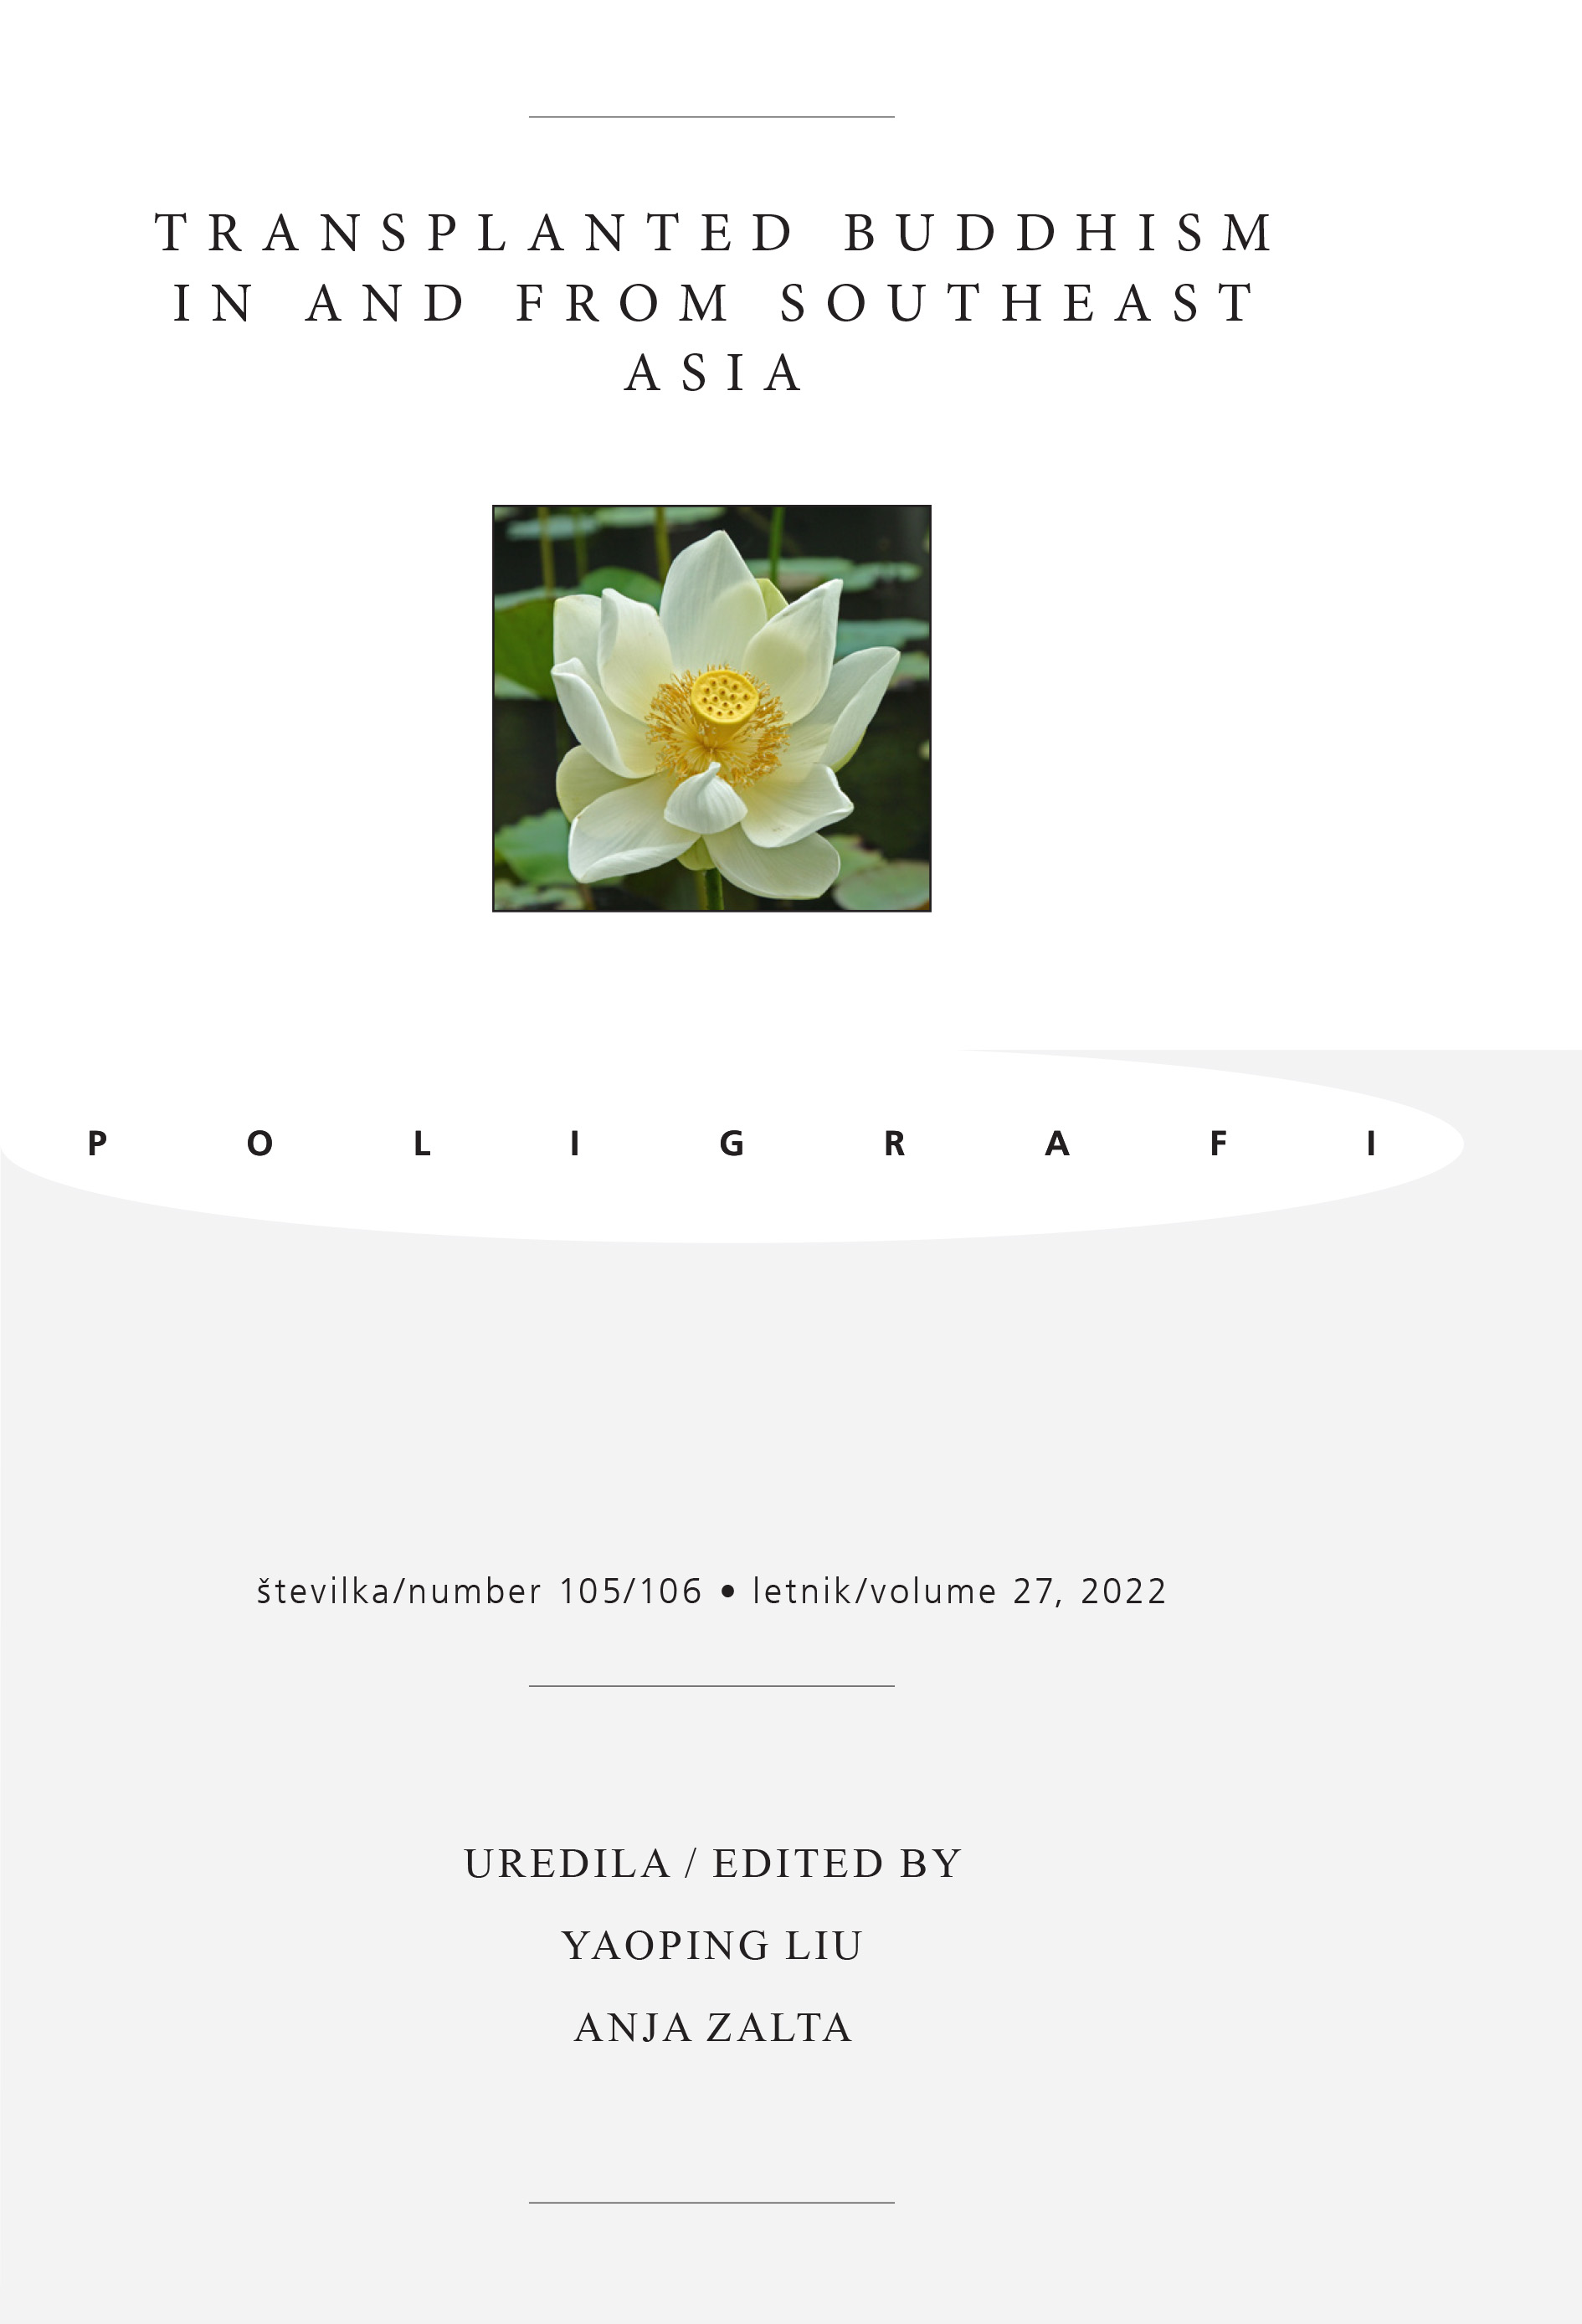 					View Vol. 27 No. 105/106 (2022): Transplanted Buddhism in and from Southeast Asia
				